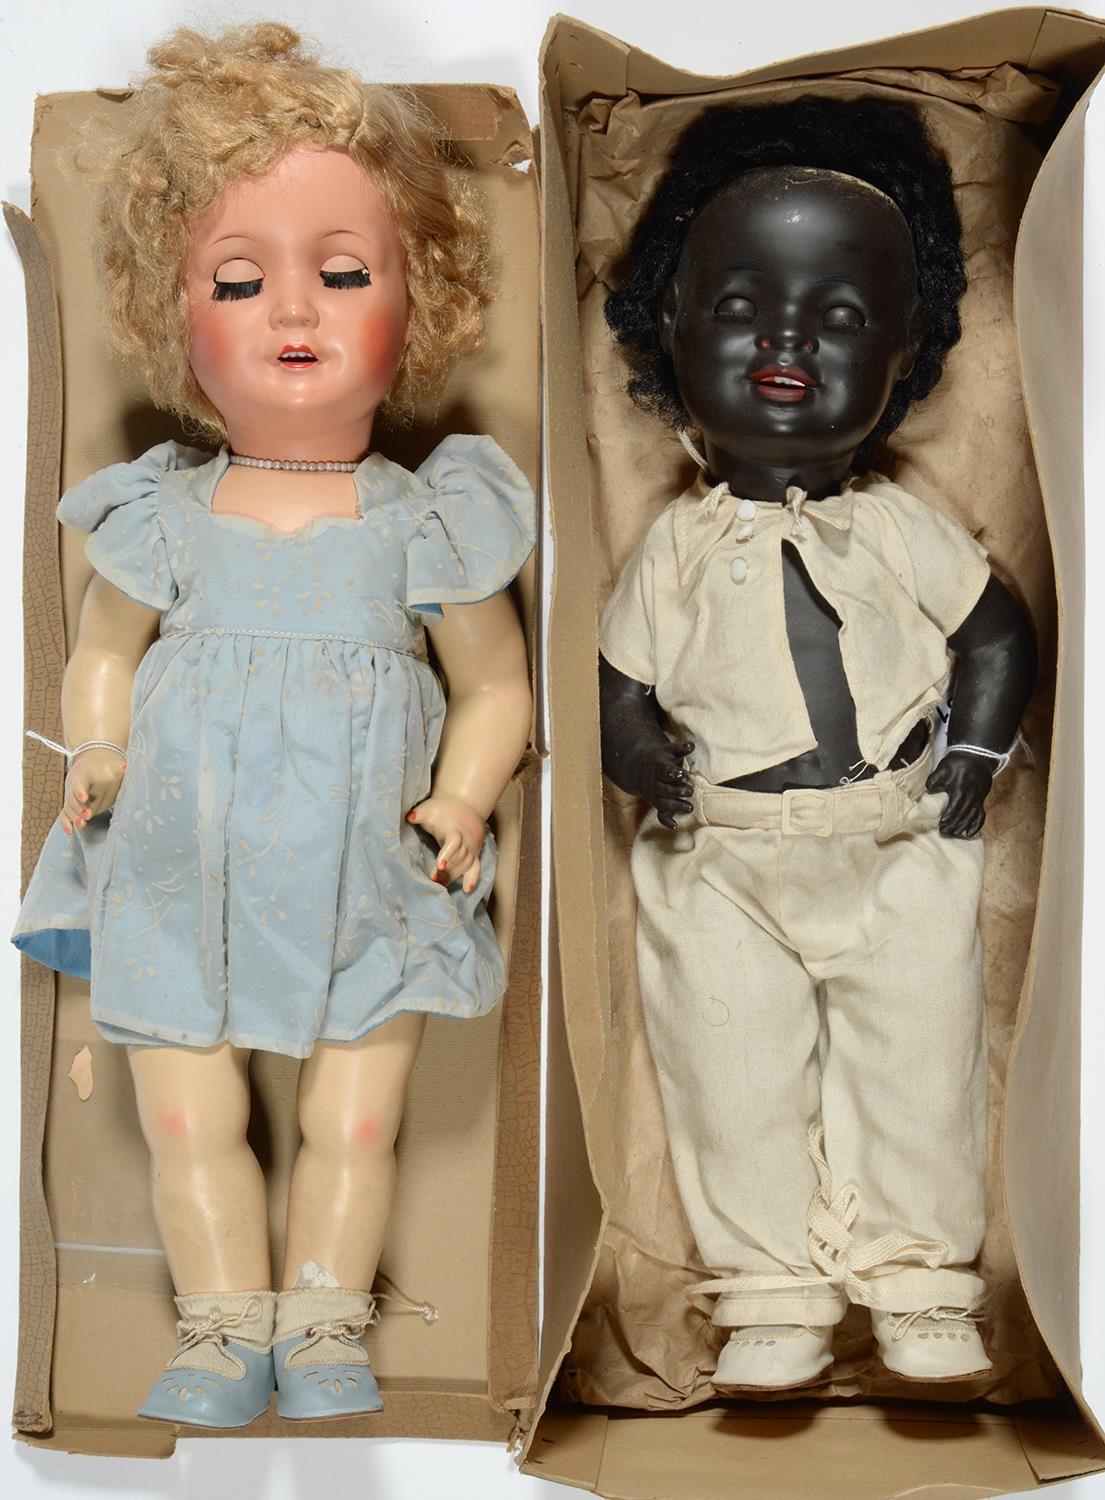 A KEONIG WERNICKE BISQUE BLACK BABY CHARACTER DOLL, C1930, WITH JOINTED COMPOSITION BODY INCLUDING